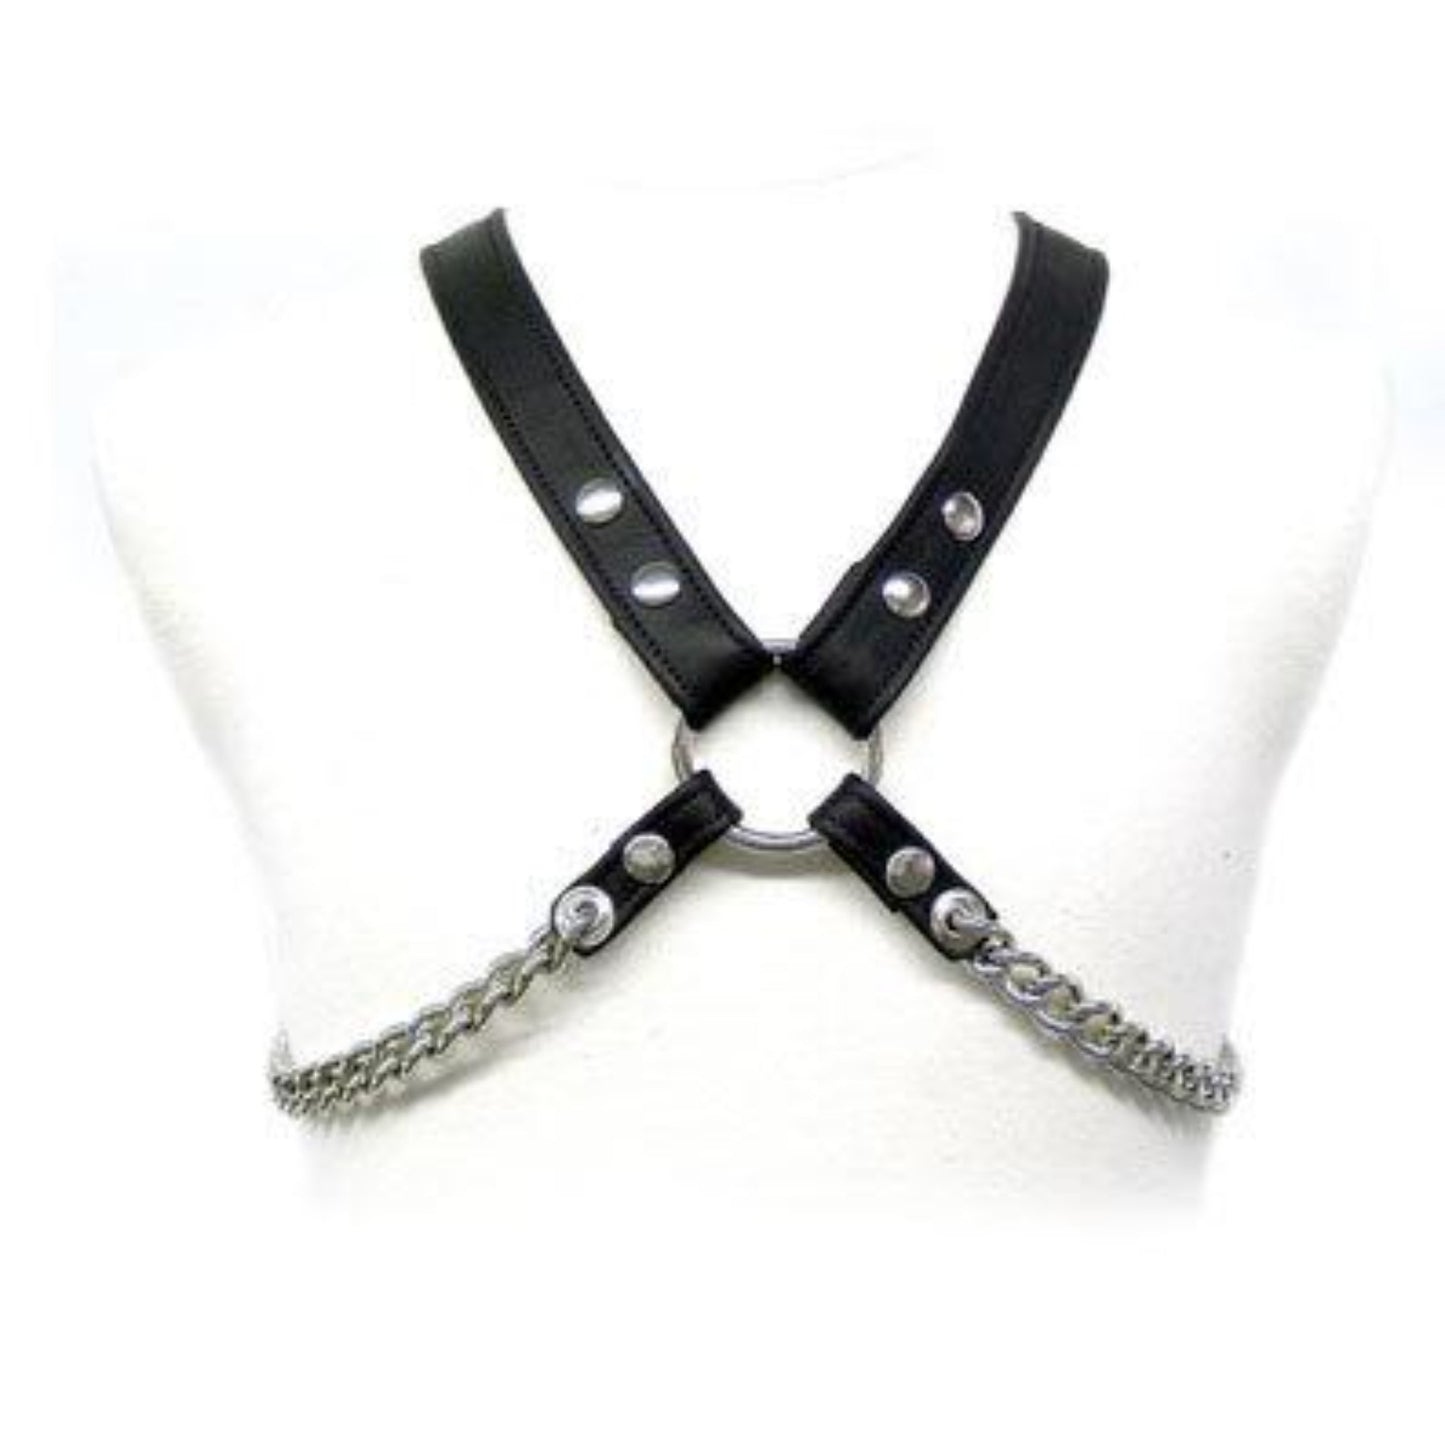 The black Leather & Single Chain Harness.